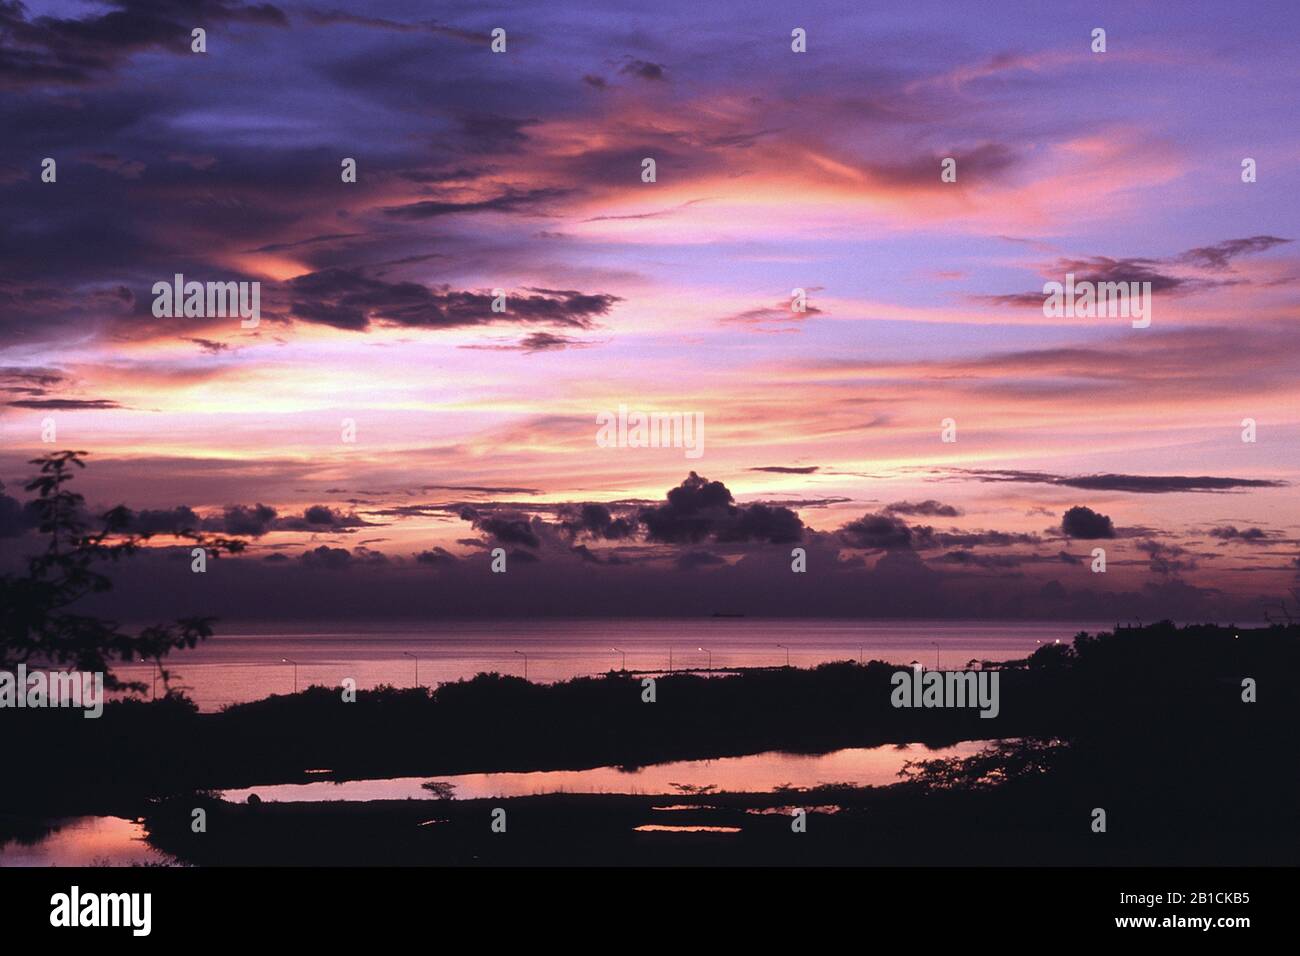 sunset at Willemstad, Netherlands Antilles, Curacao, Willemstad Stock Photo